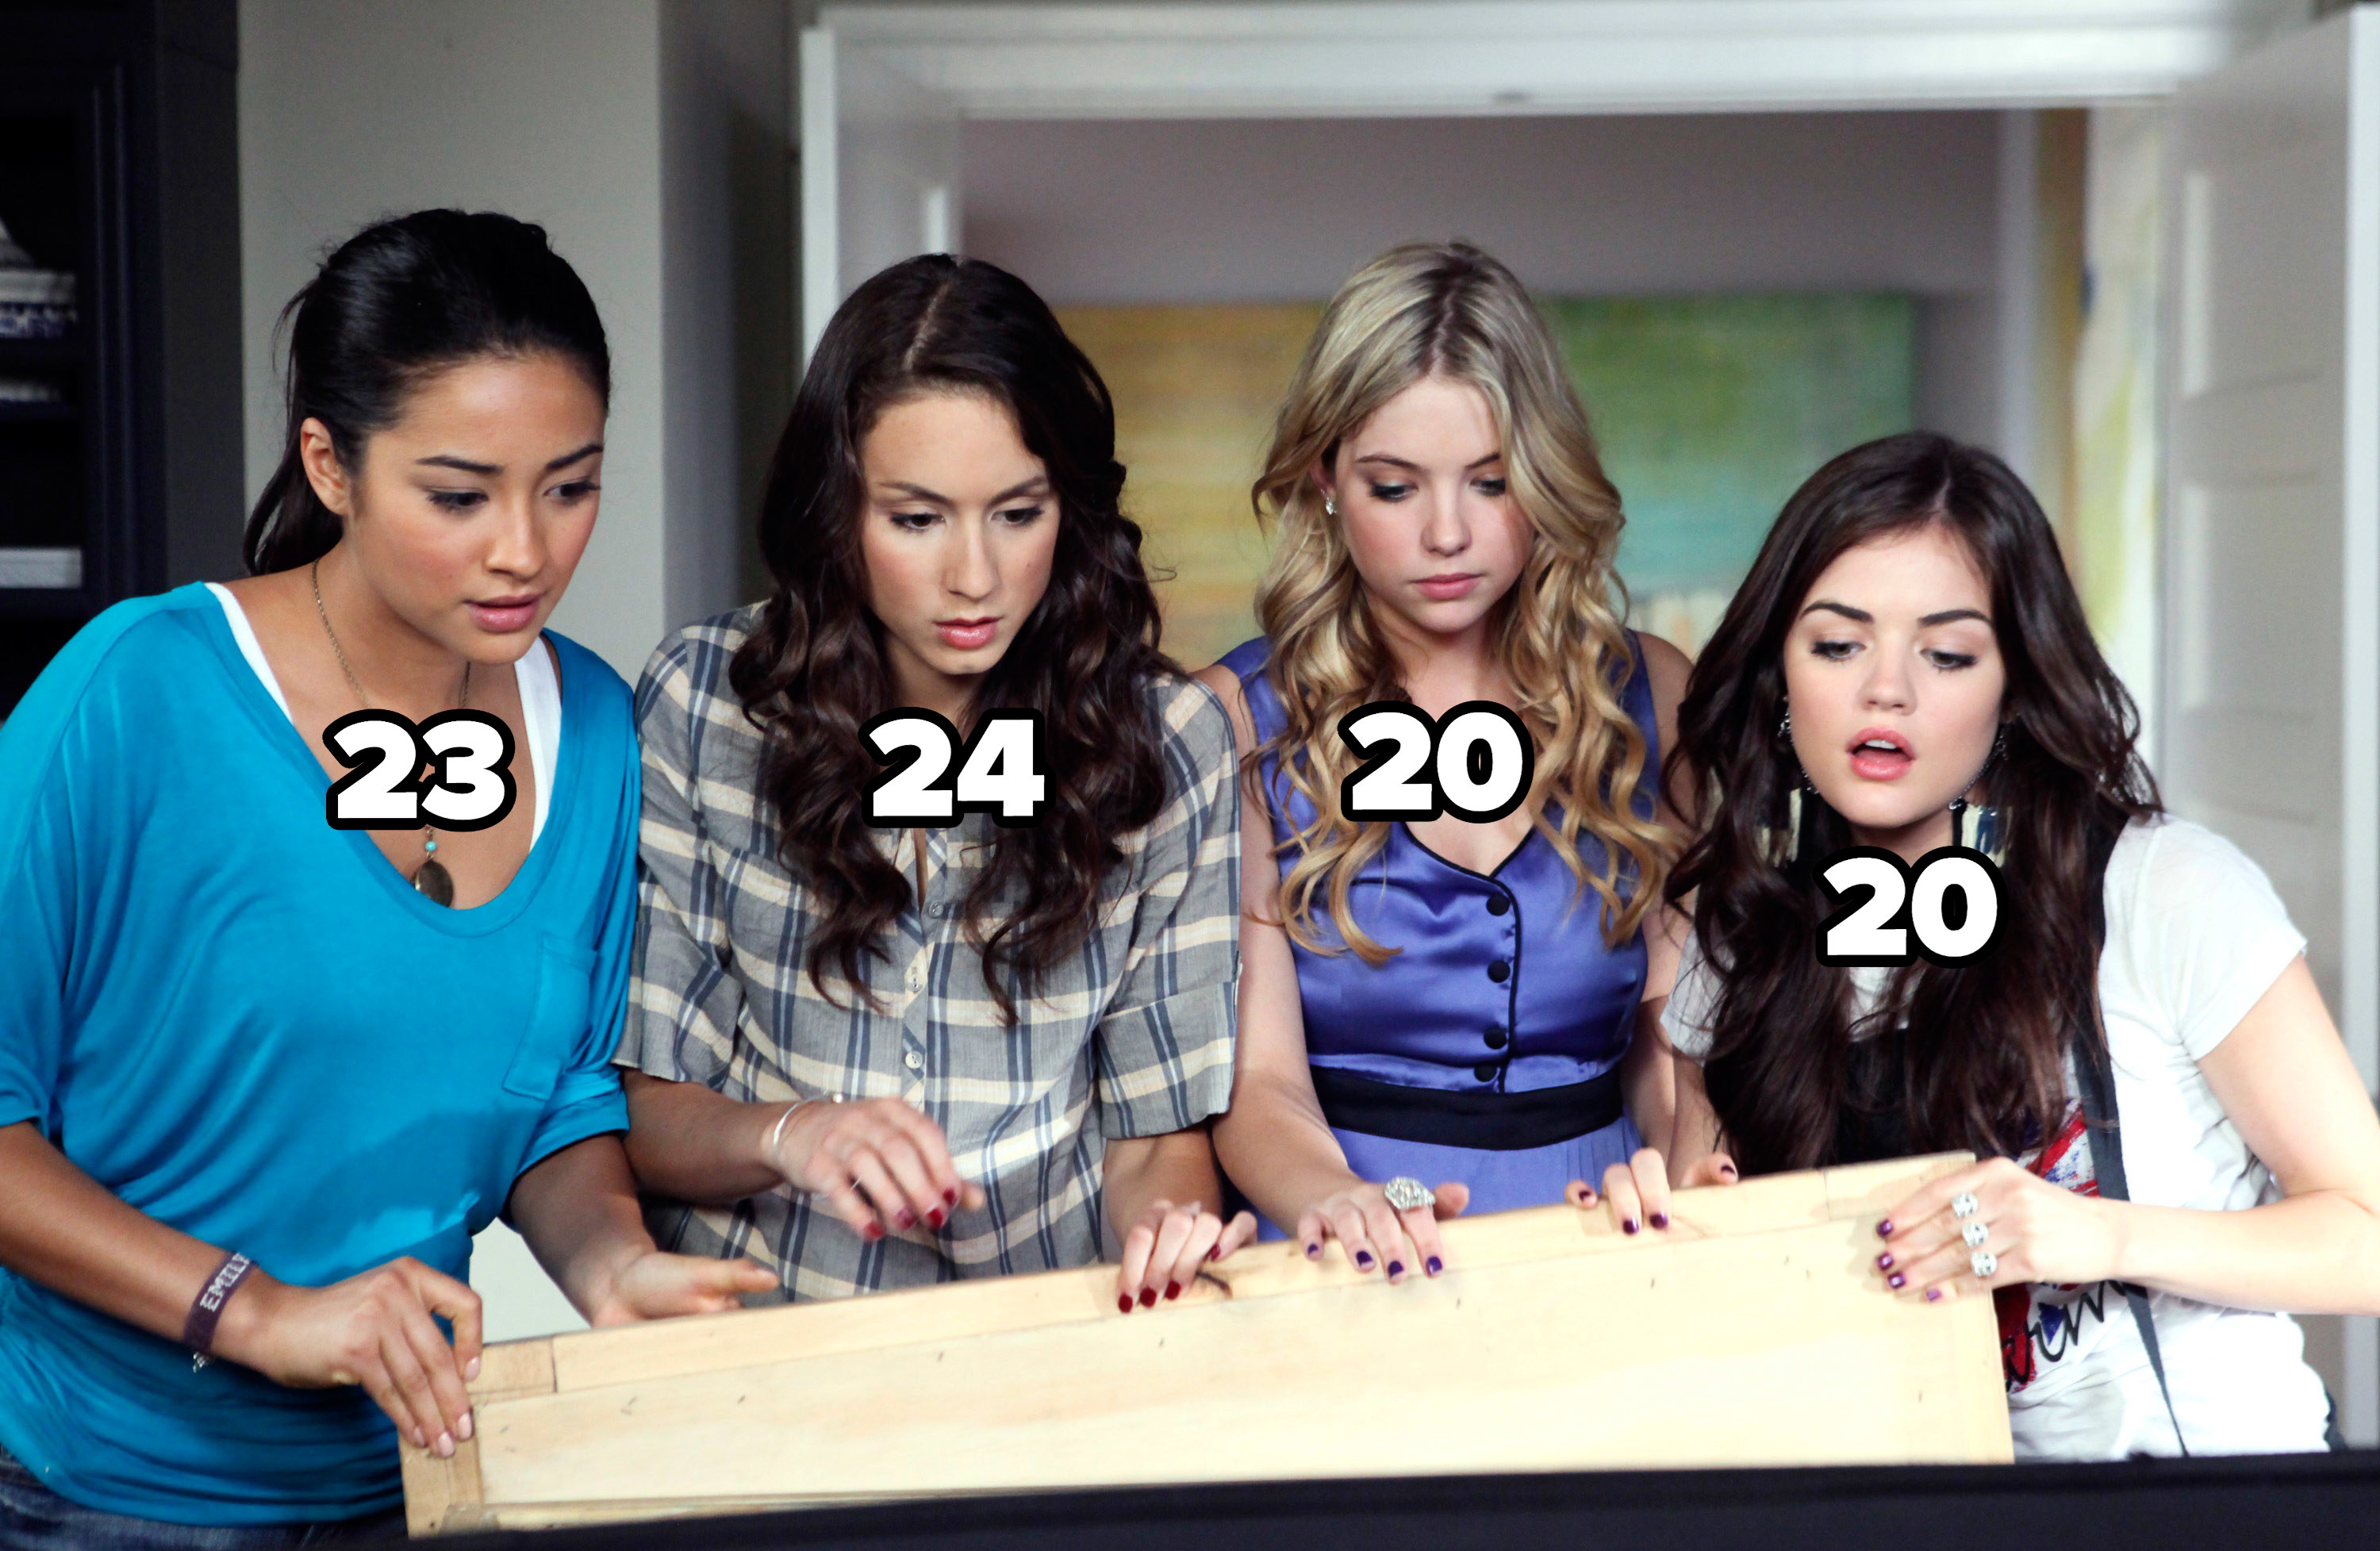 Emily (labeled 23), Spencer (labeled 24), Hanna (labeled 20), and Aria (labeled 20)